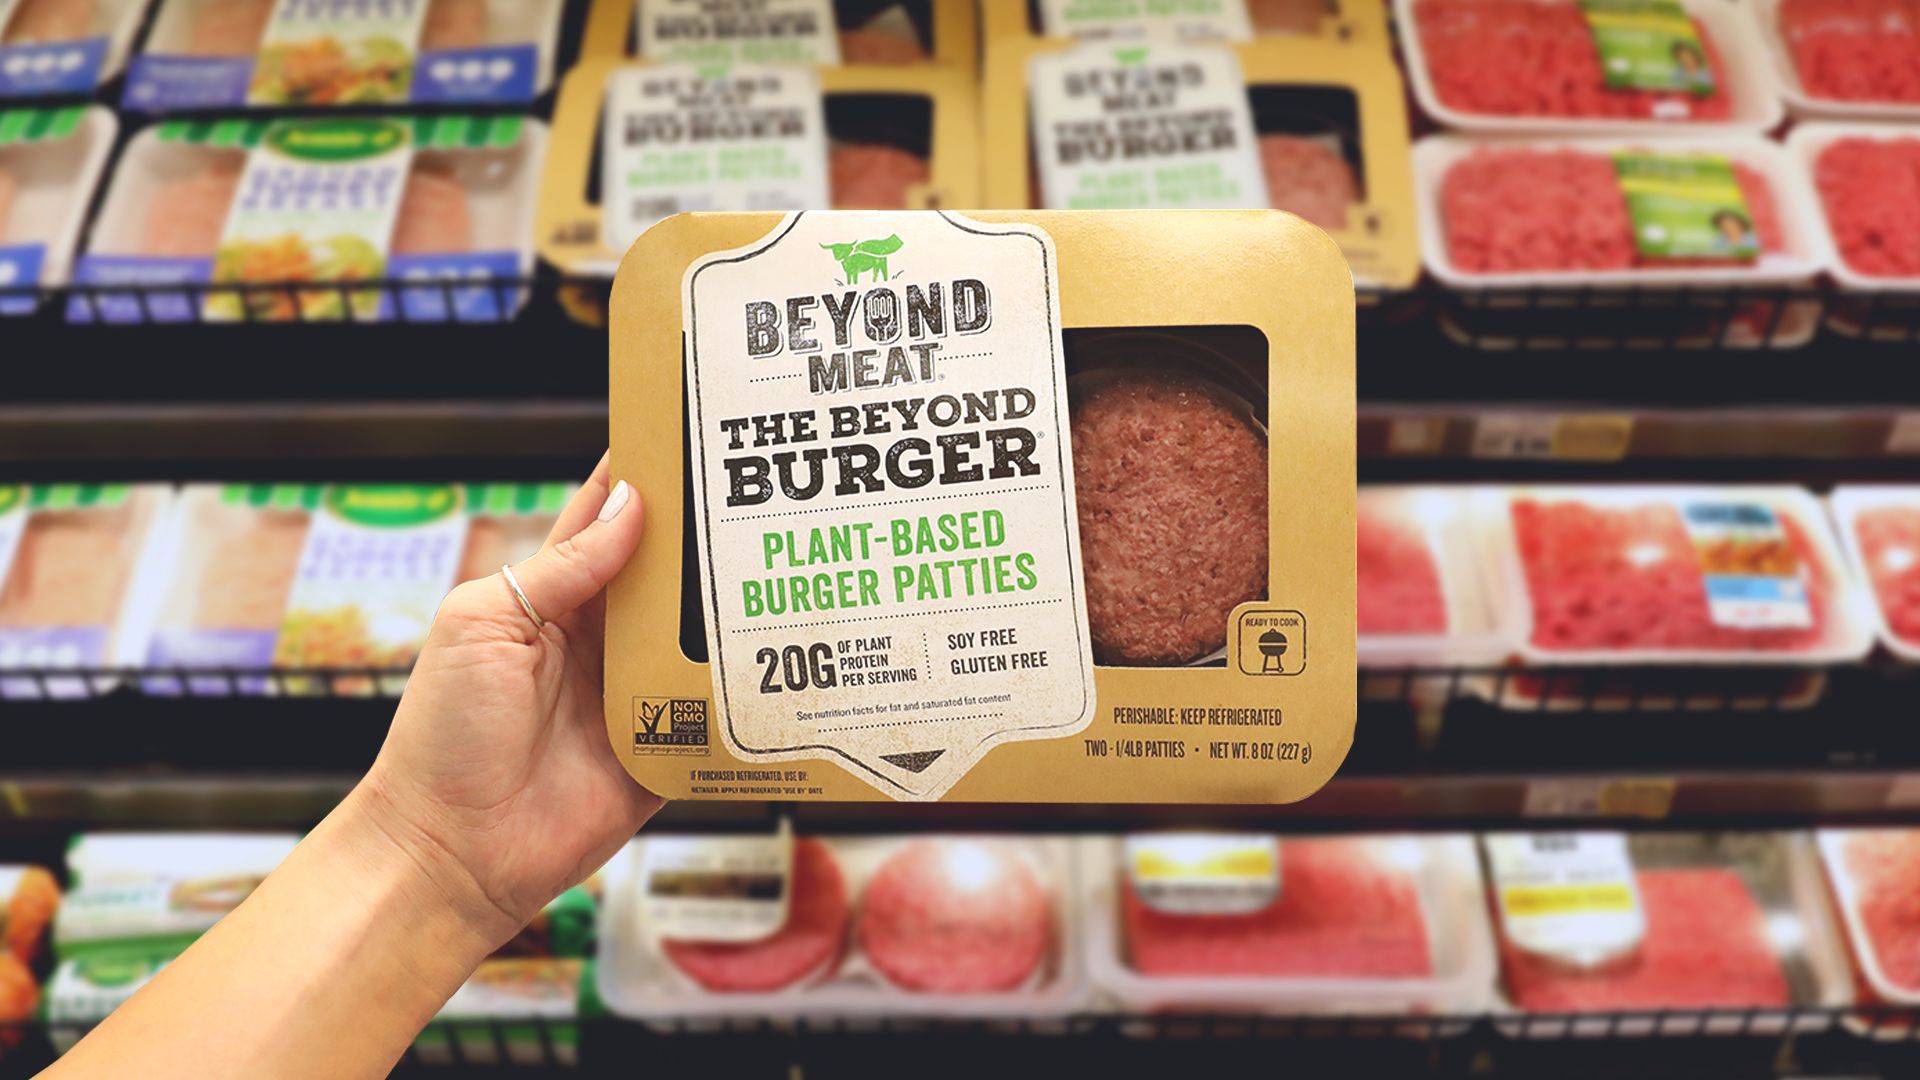 Where does Beyond Meat belong in the grocery store?